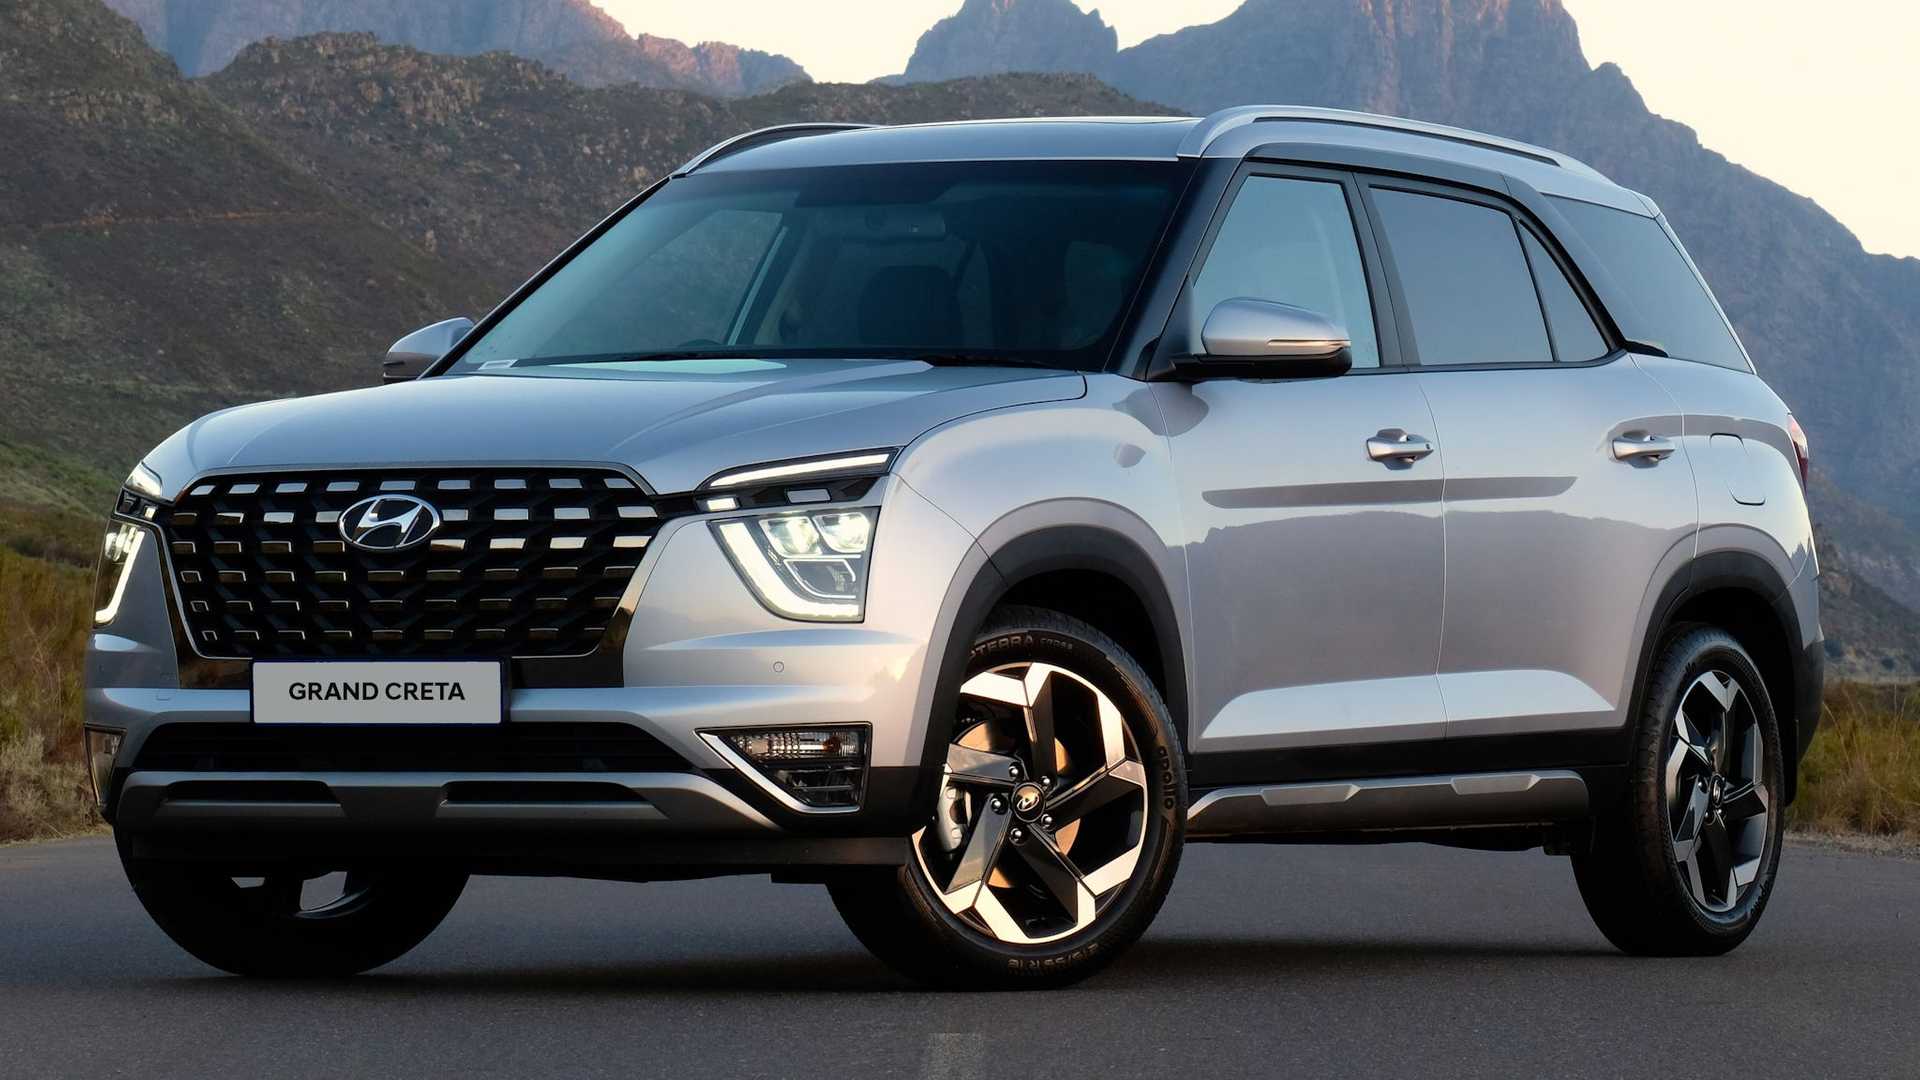 2022 Hyundai Grand Creta ThreeRow Crossover Launched in South Africa